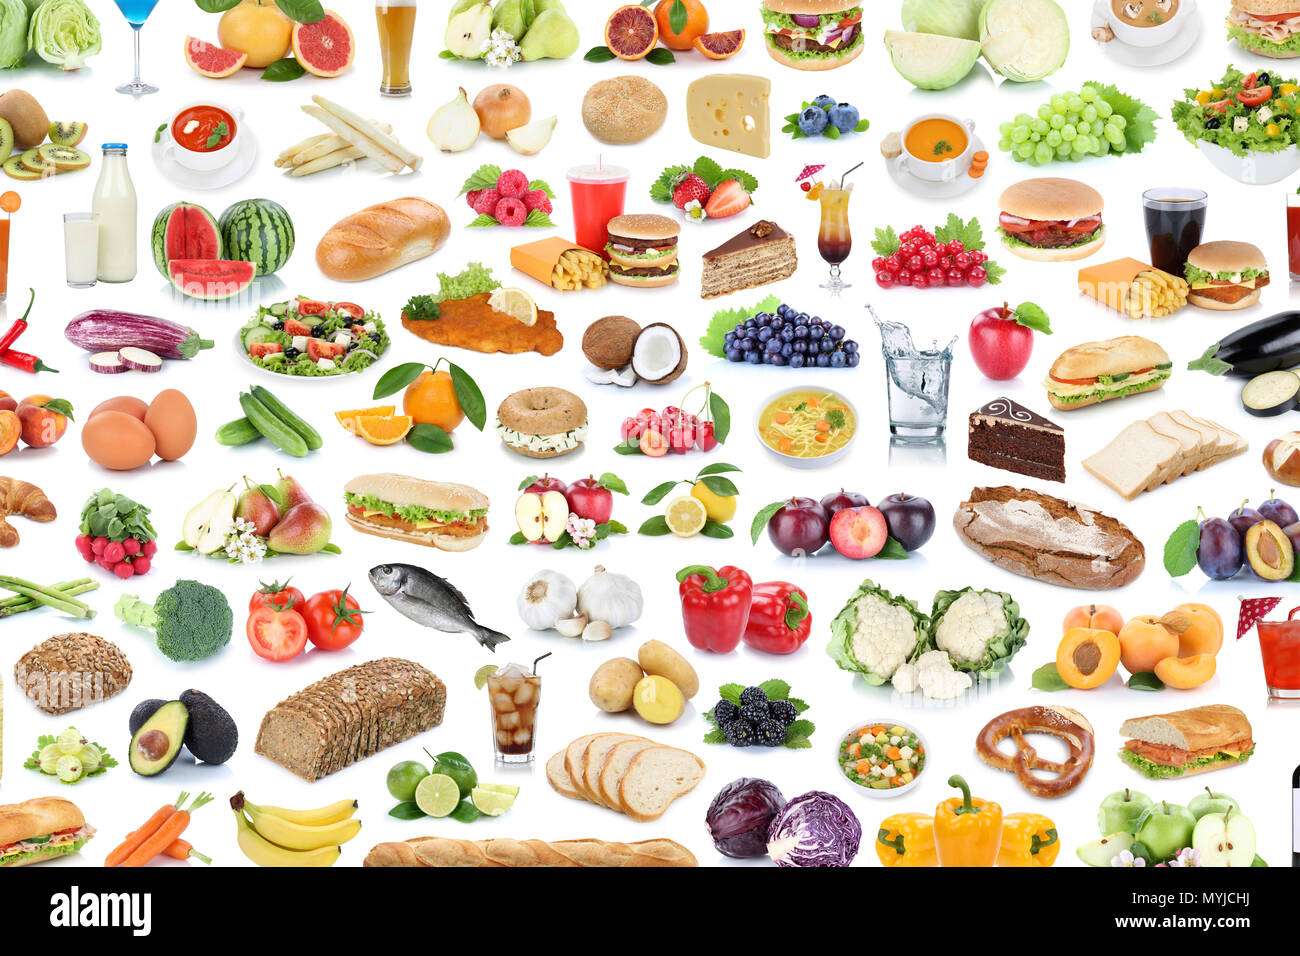 Collection of food and drink background collage healthy eating fruits vegetables fruit drinks isolated on a white background Stock Photo